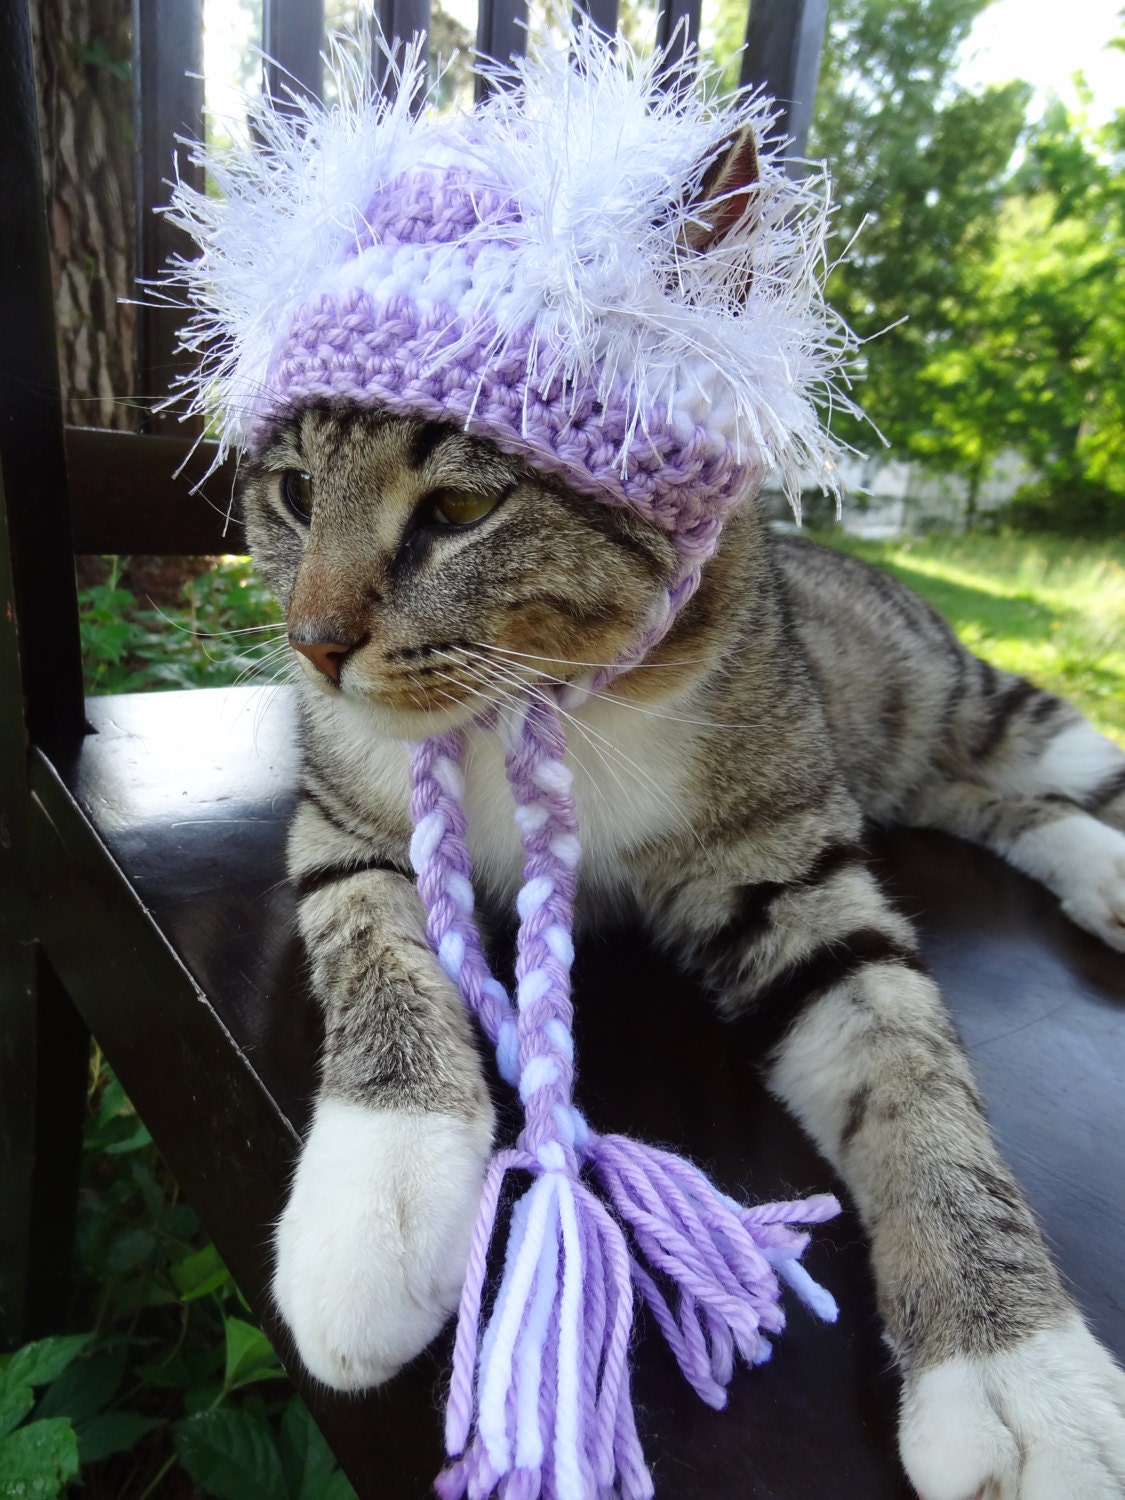 Cat and Dog Hat Costume - The Lilac and White Wackadoodle Hat for Cats and Small Dogs